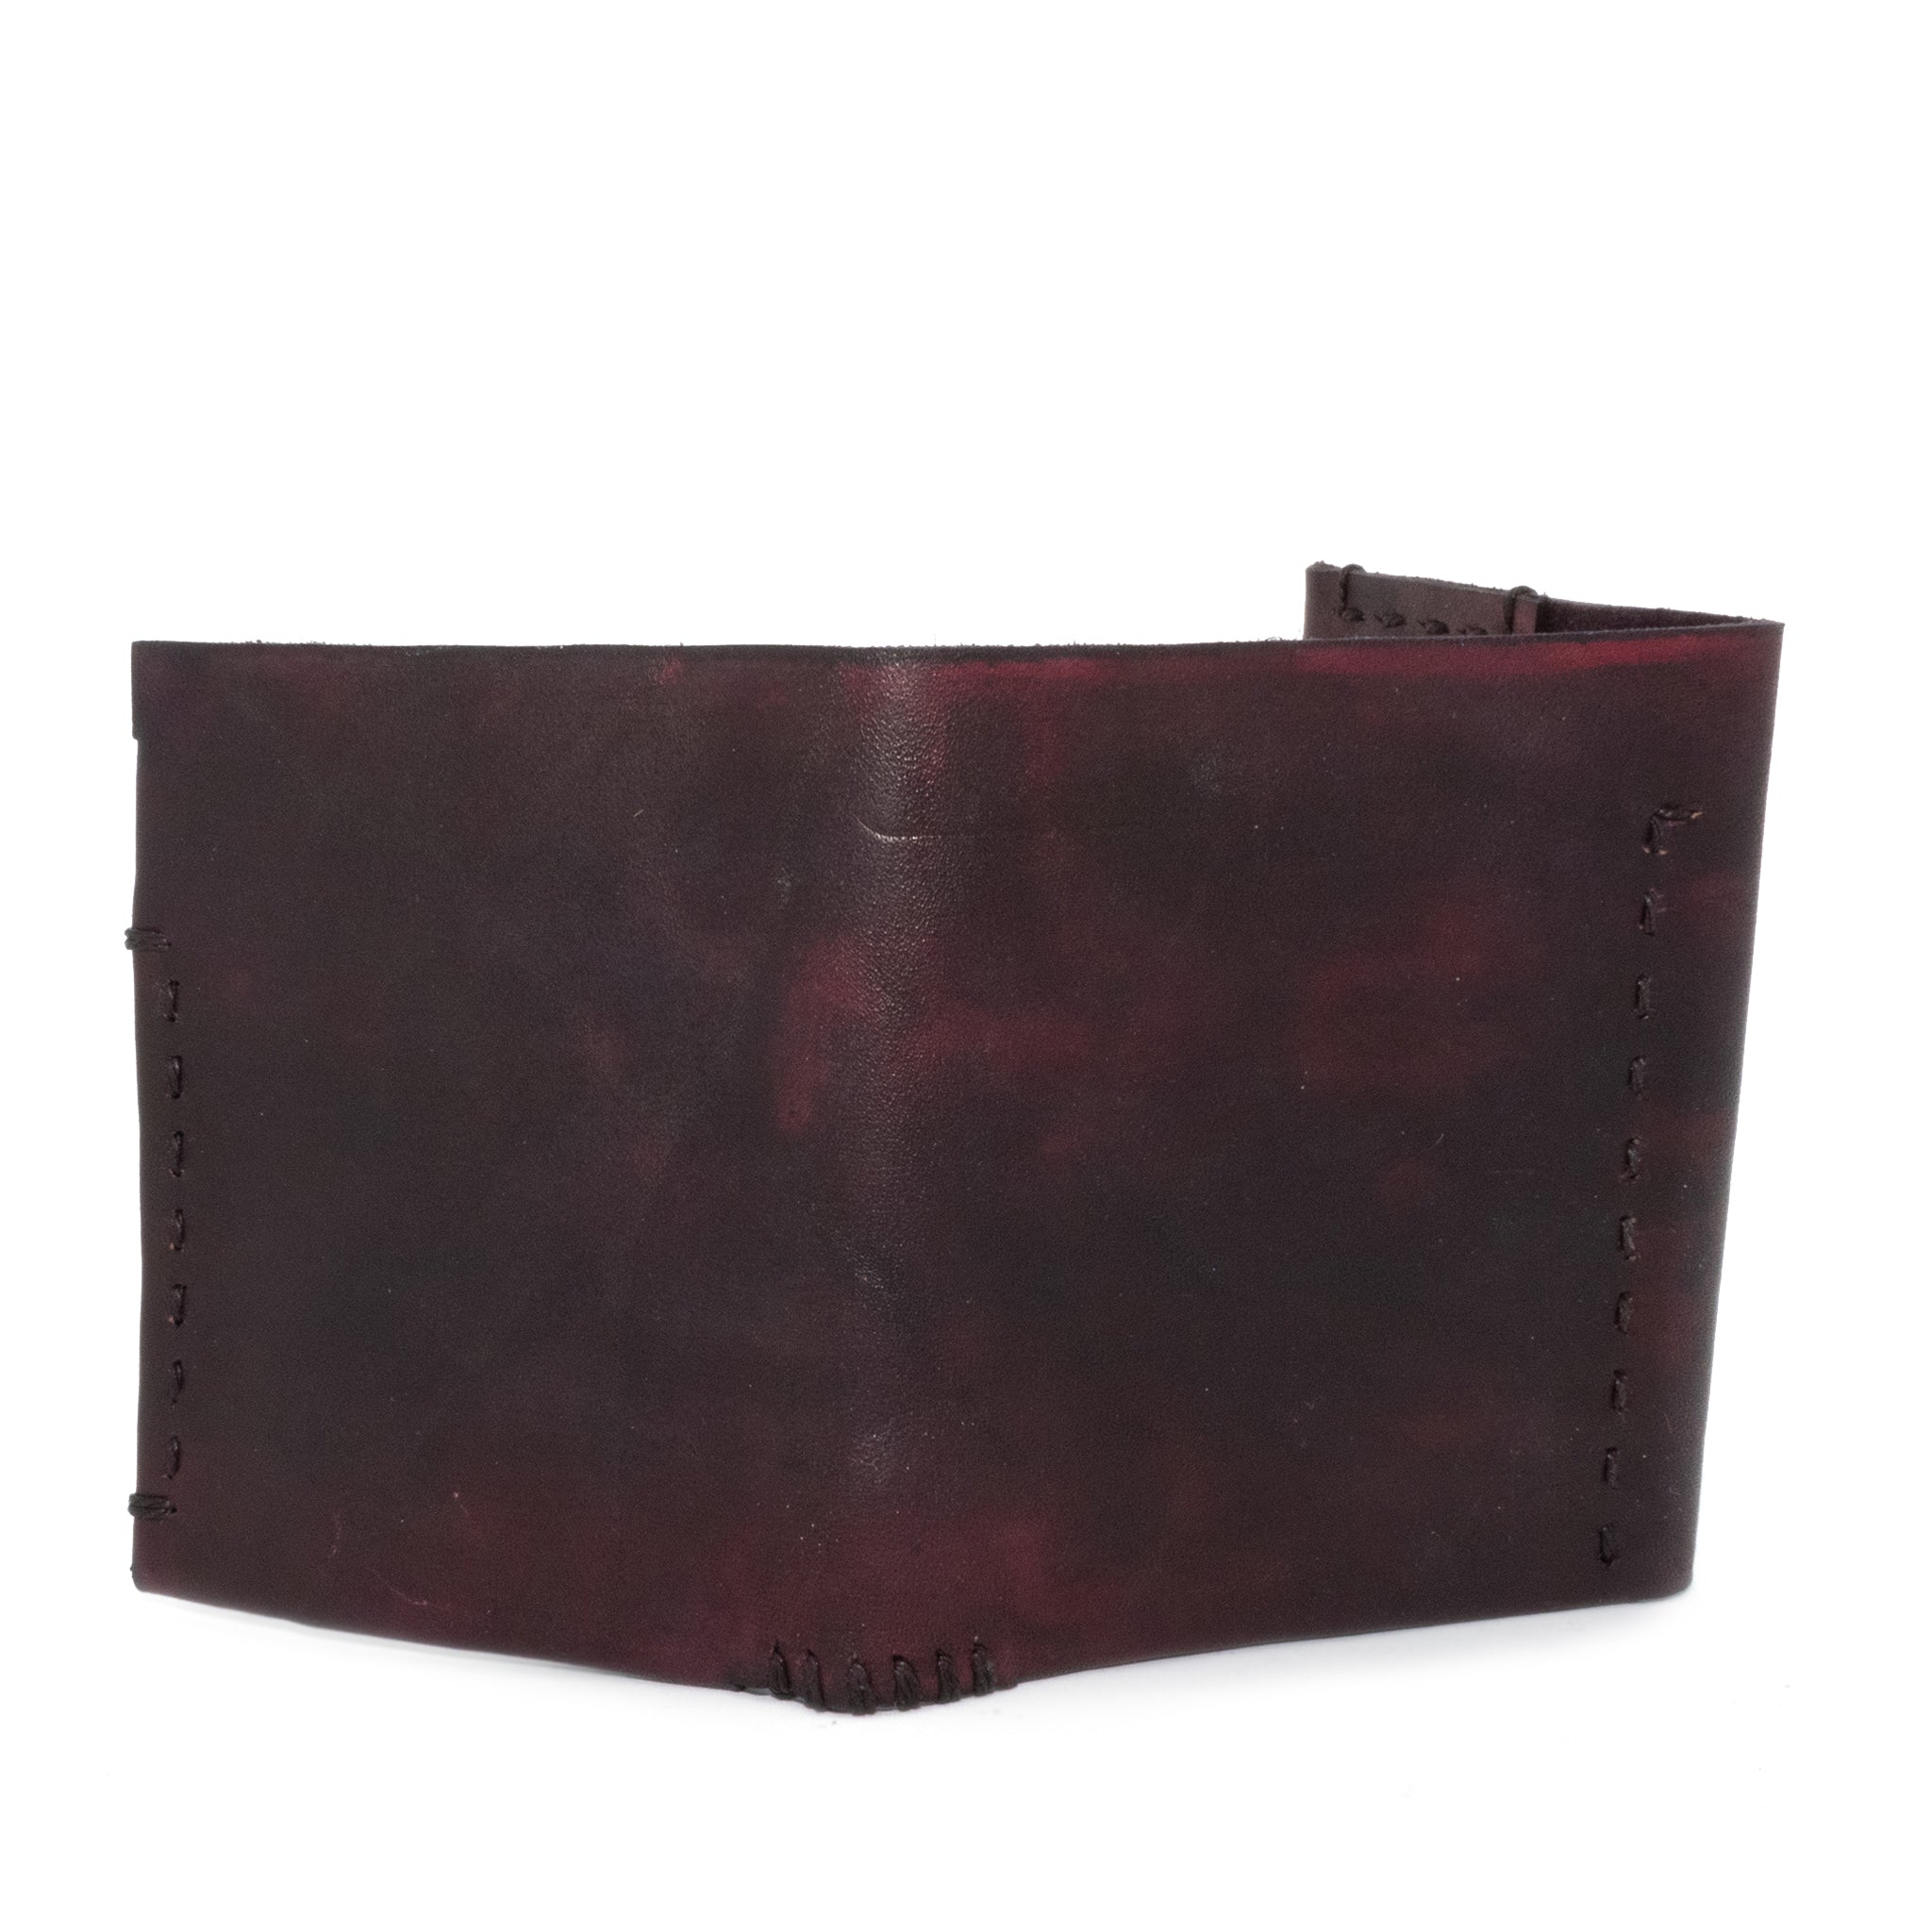 blood red hand dyed culatta leather wallet from atelier skn